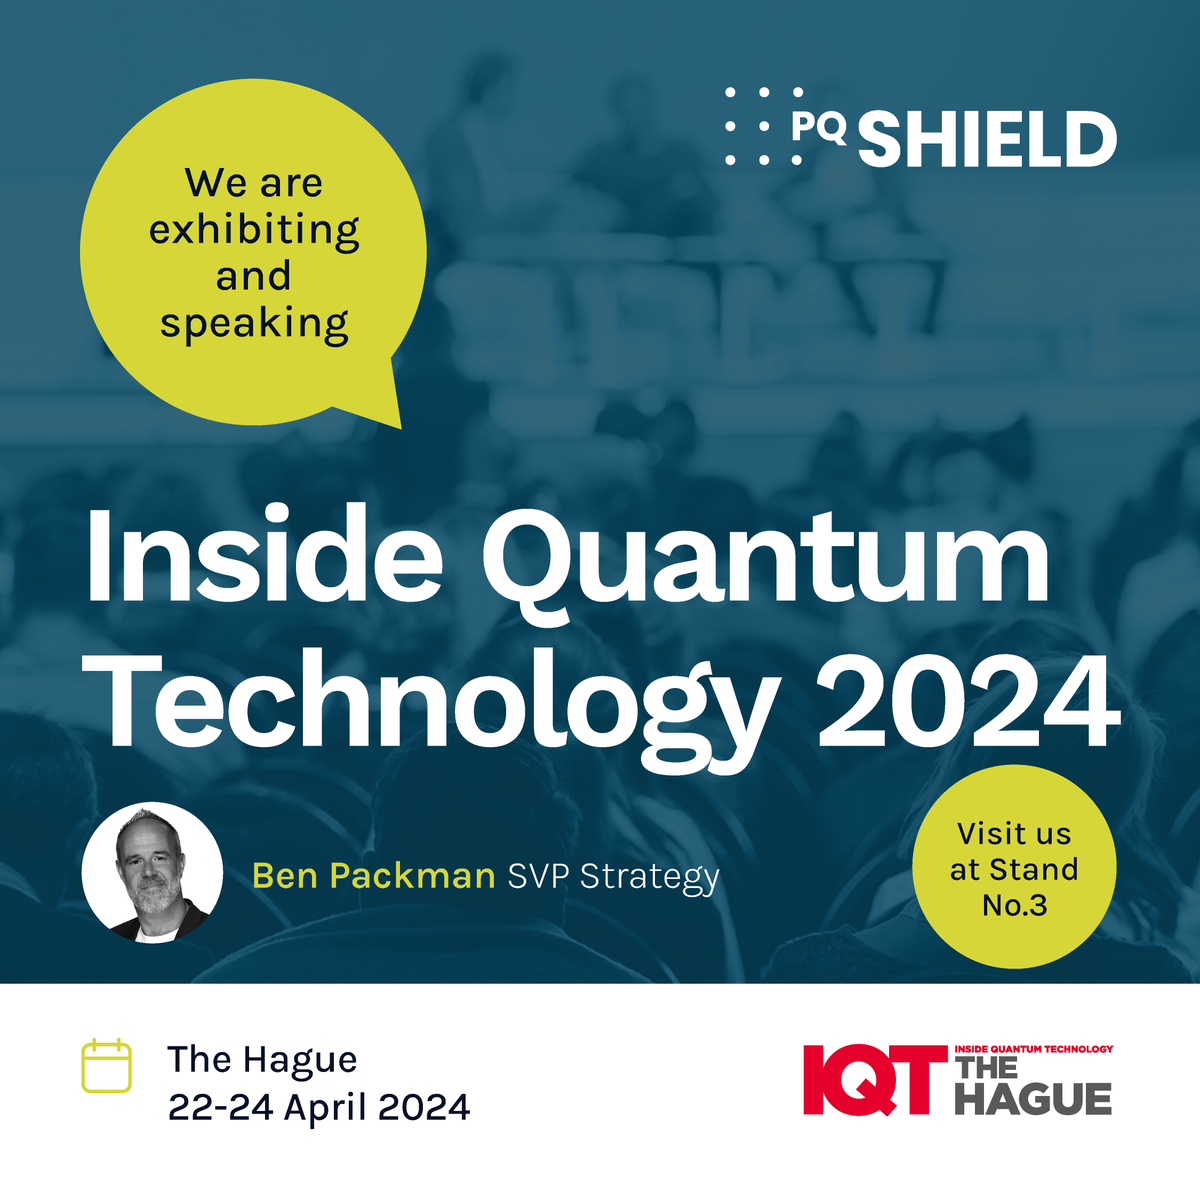 Our SVP Ben Packman will be speaking this morning at IQT the Hague, Panel 1 - 'A quantum threat reality check'. 
Do come along and visit us at stand no. 3!
#IQT #quantumtech #cybersecurity #quantumsafe #quantumcomputers